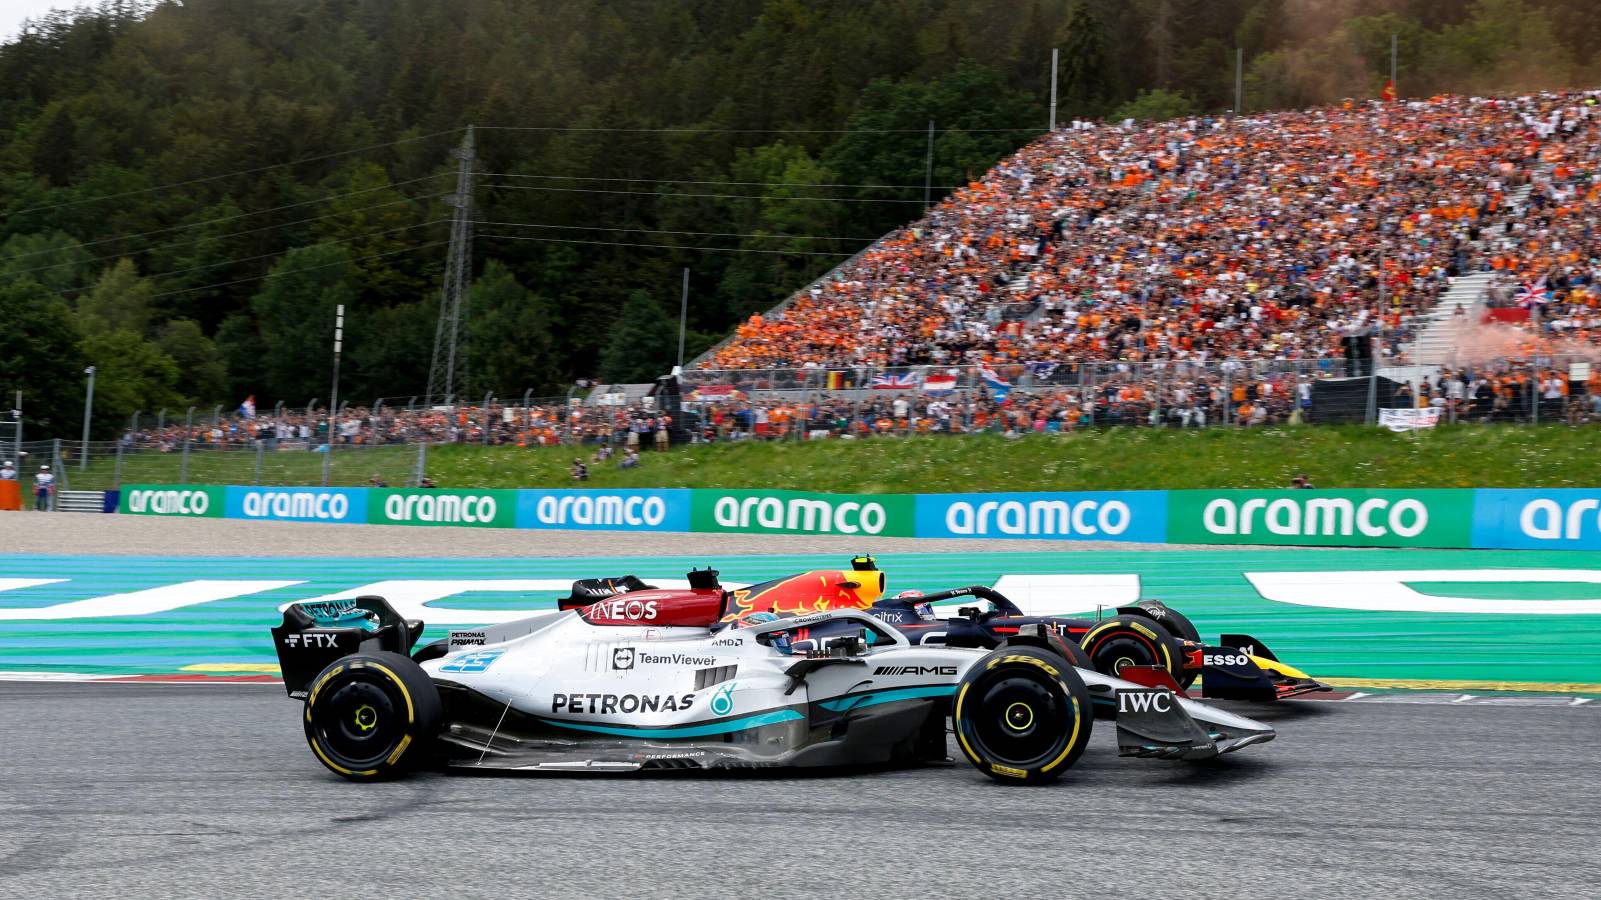 George Russell, Mercedes, alongside Sergio Perez's Red Bull. Red Bull Ring July 2022.